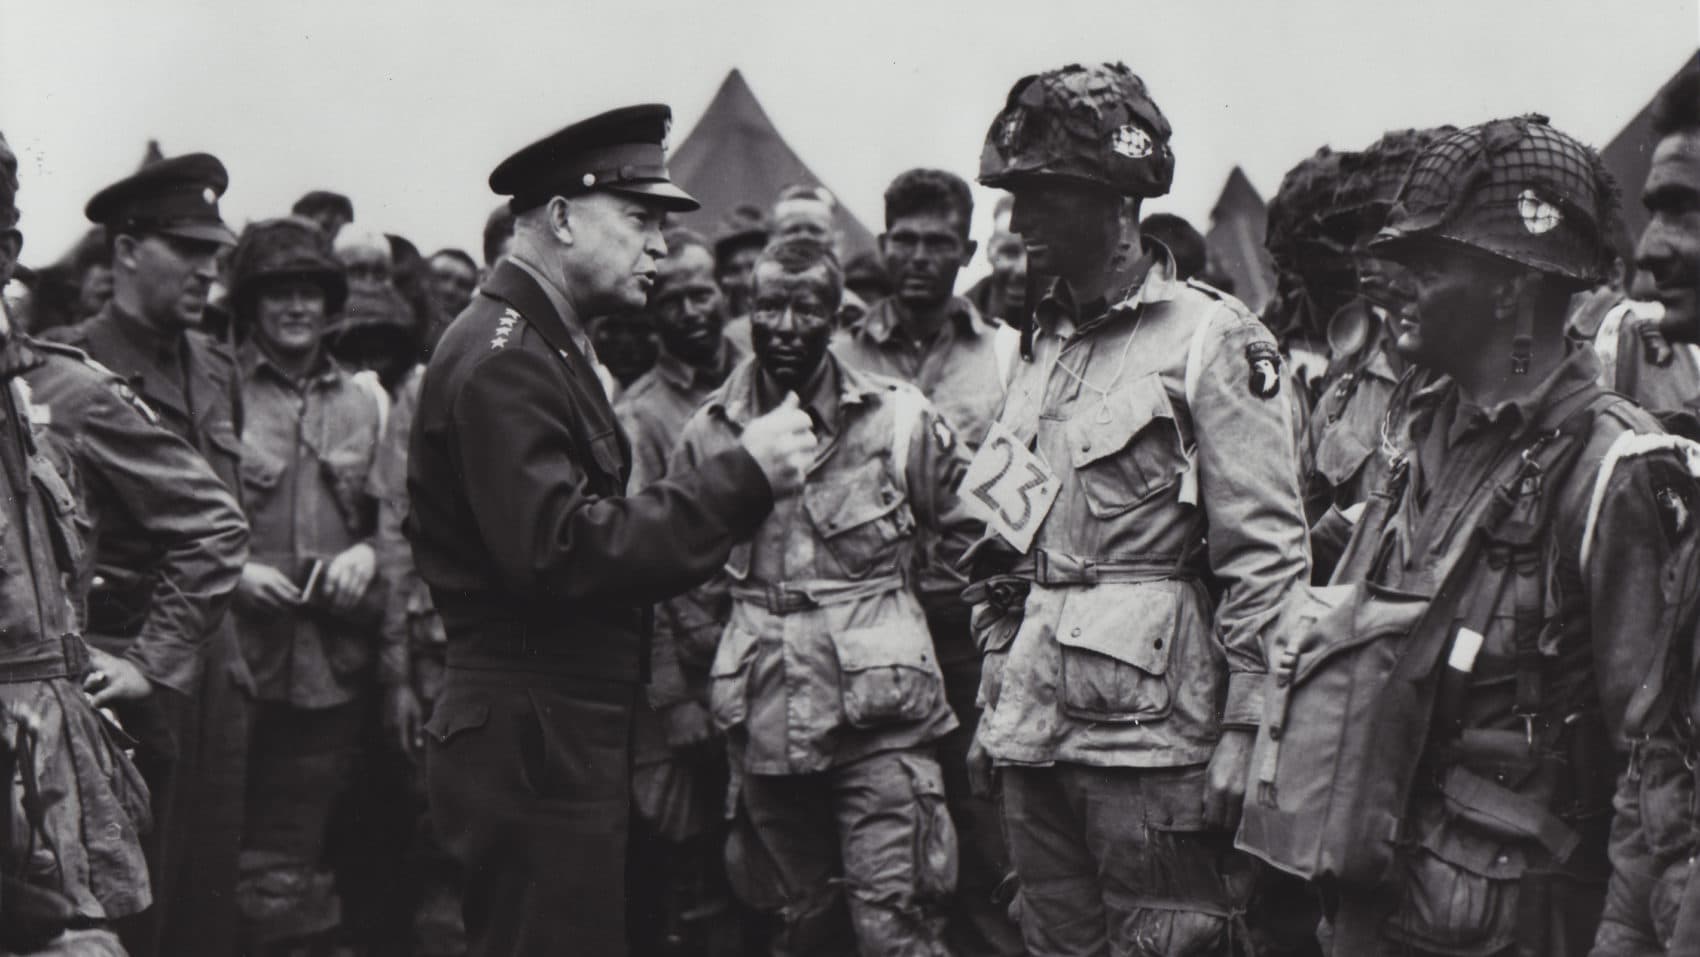 General Dwight D. Eisenhower addresses troops before the D-Day invasion of Normandy. (Courtesy of The National WWII Museum)